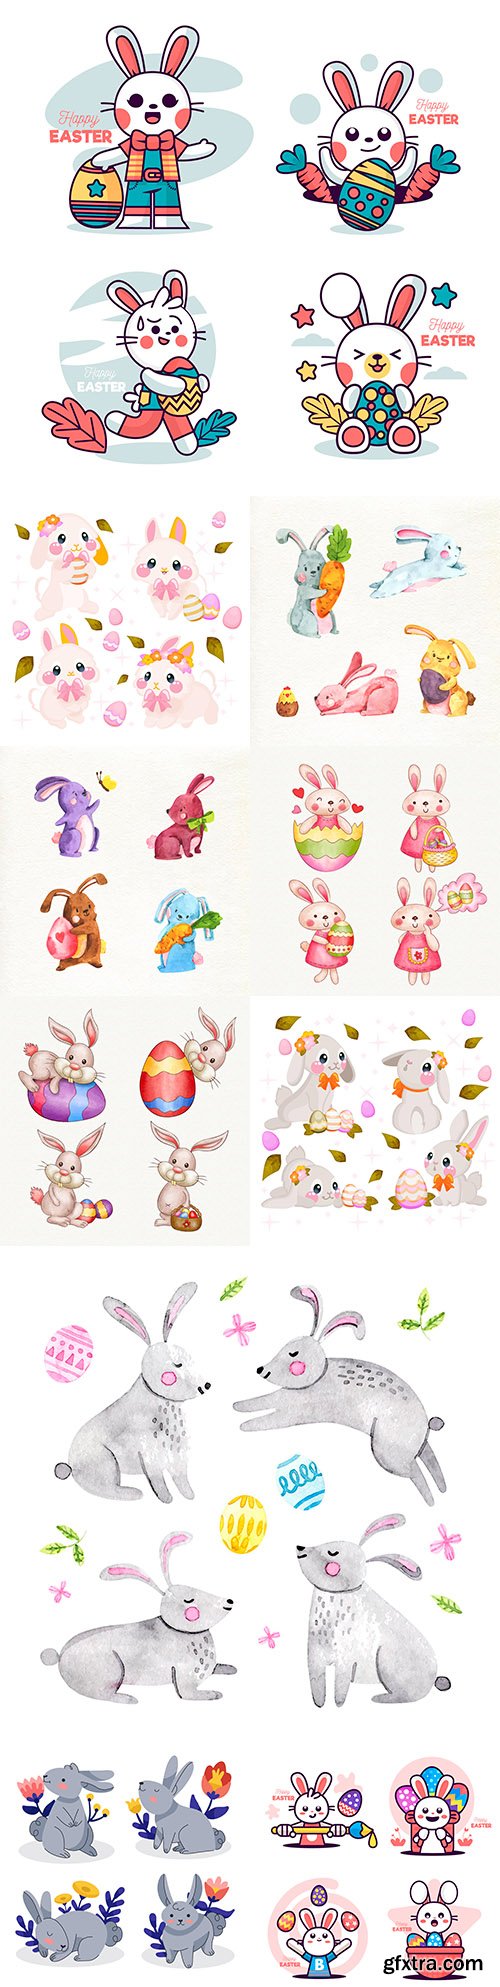 Easter rabbit collection of watercolor and flat illustrations